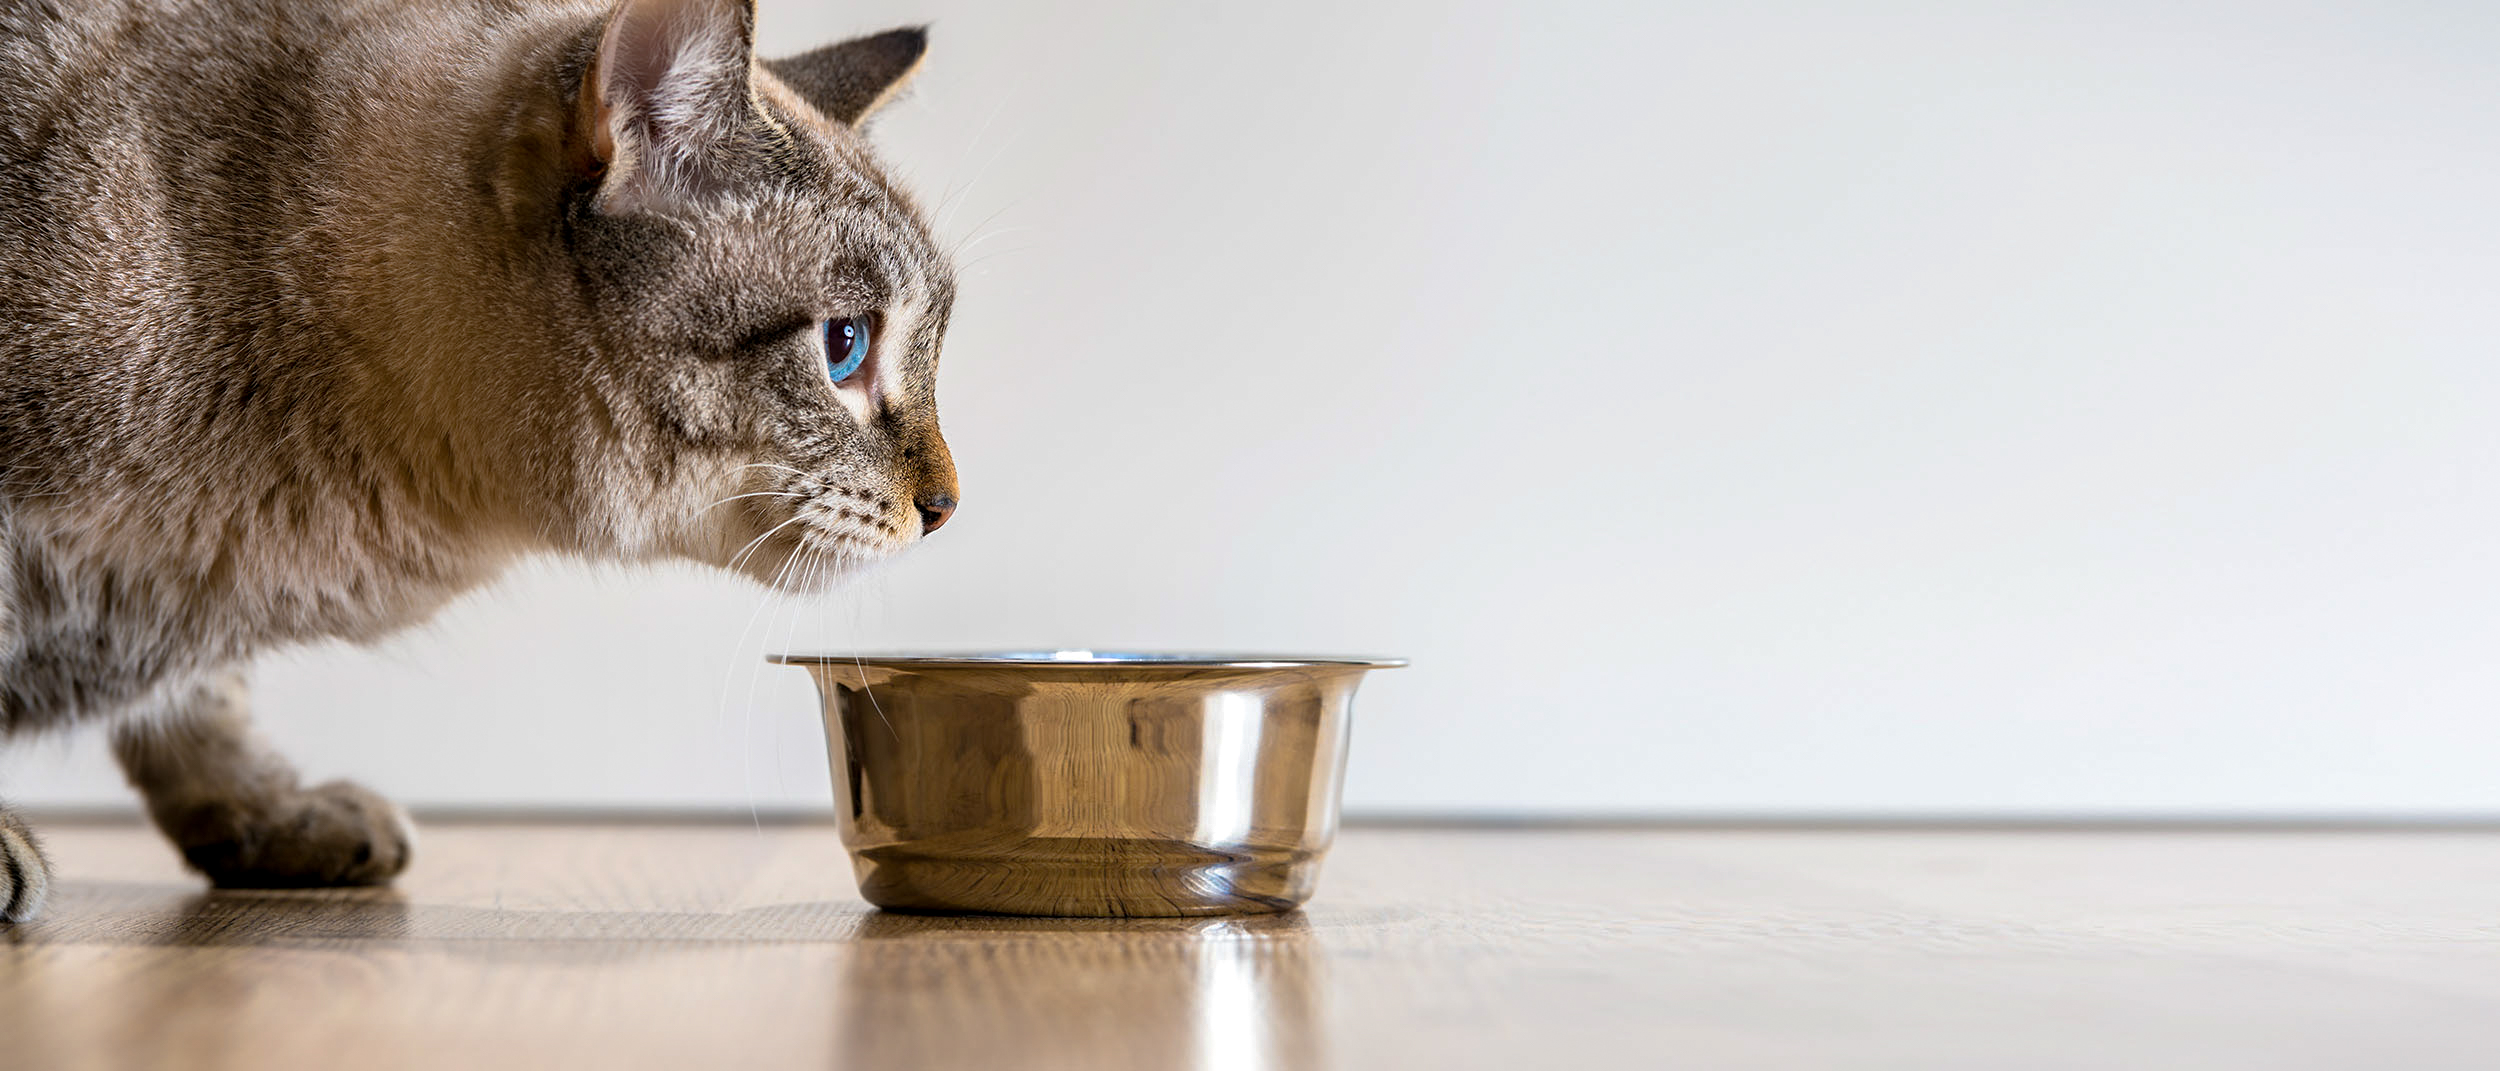 Adult cat standing indoors next to a silver bowl.